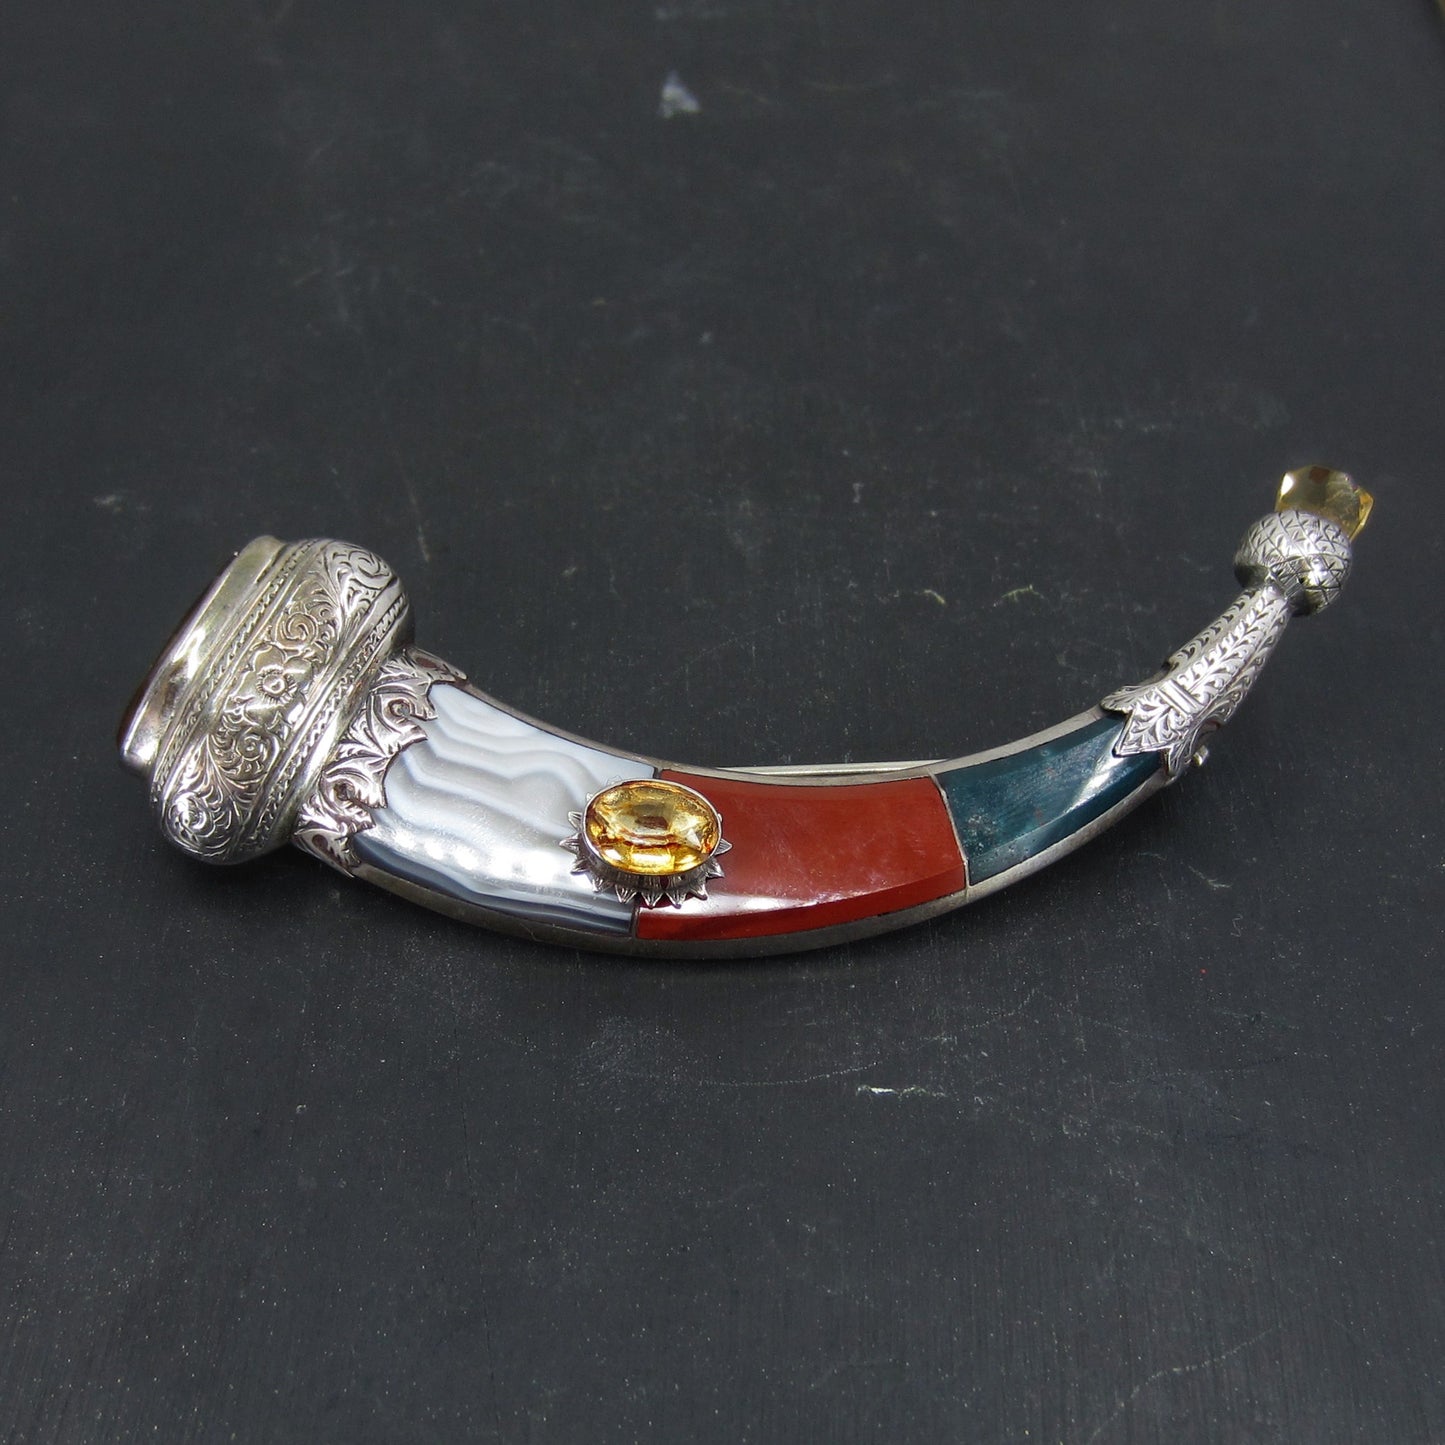 SOLD--Huge Victorian Scottish Agate and Citrine Hunting Horn Brooch Sterling c. 1880